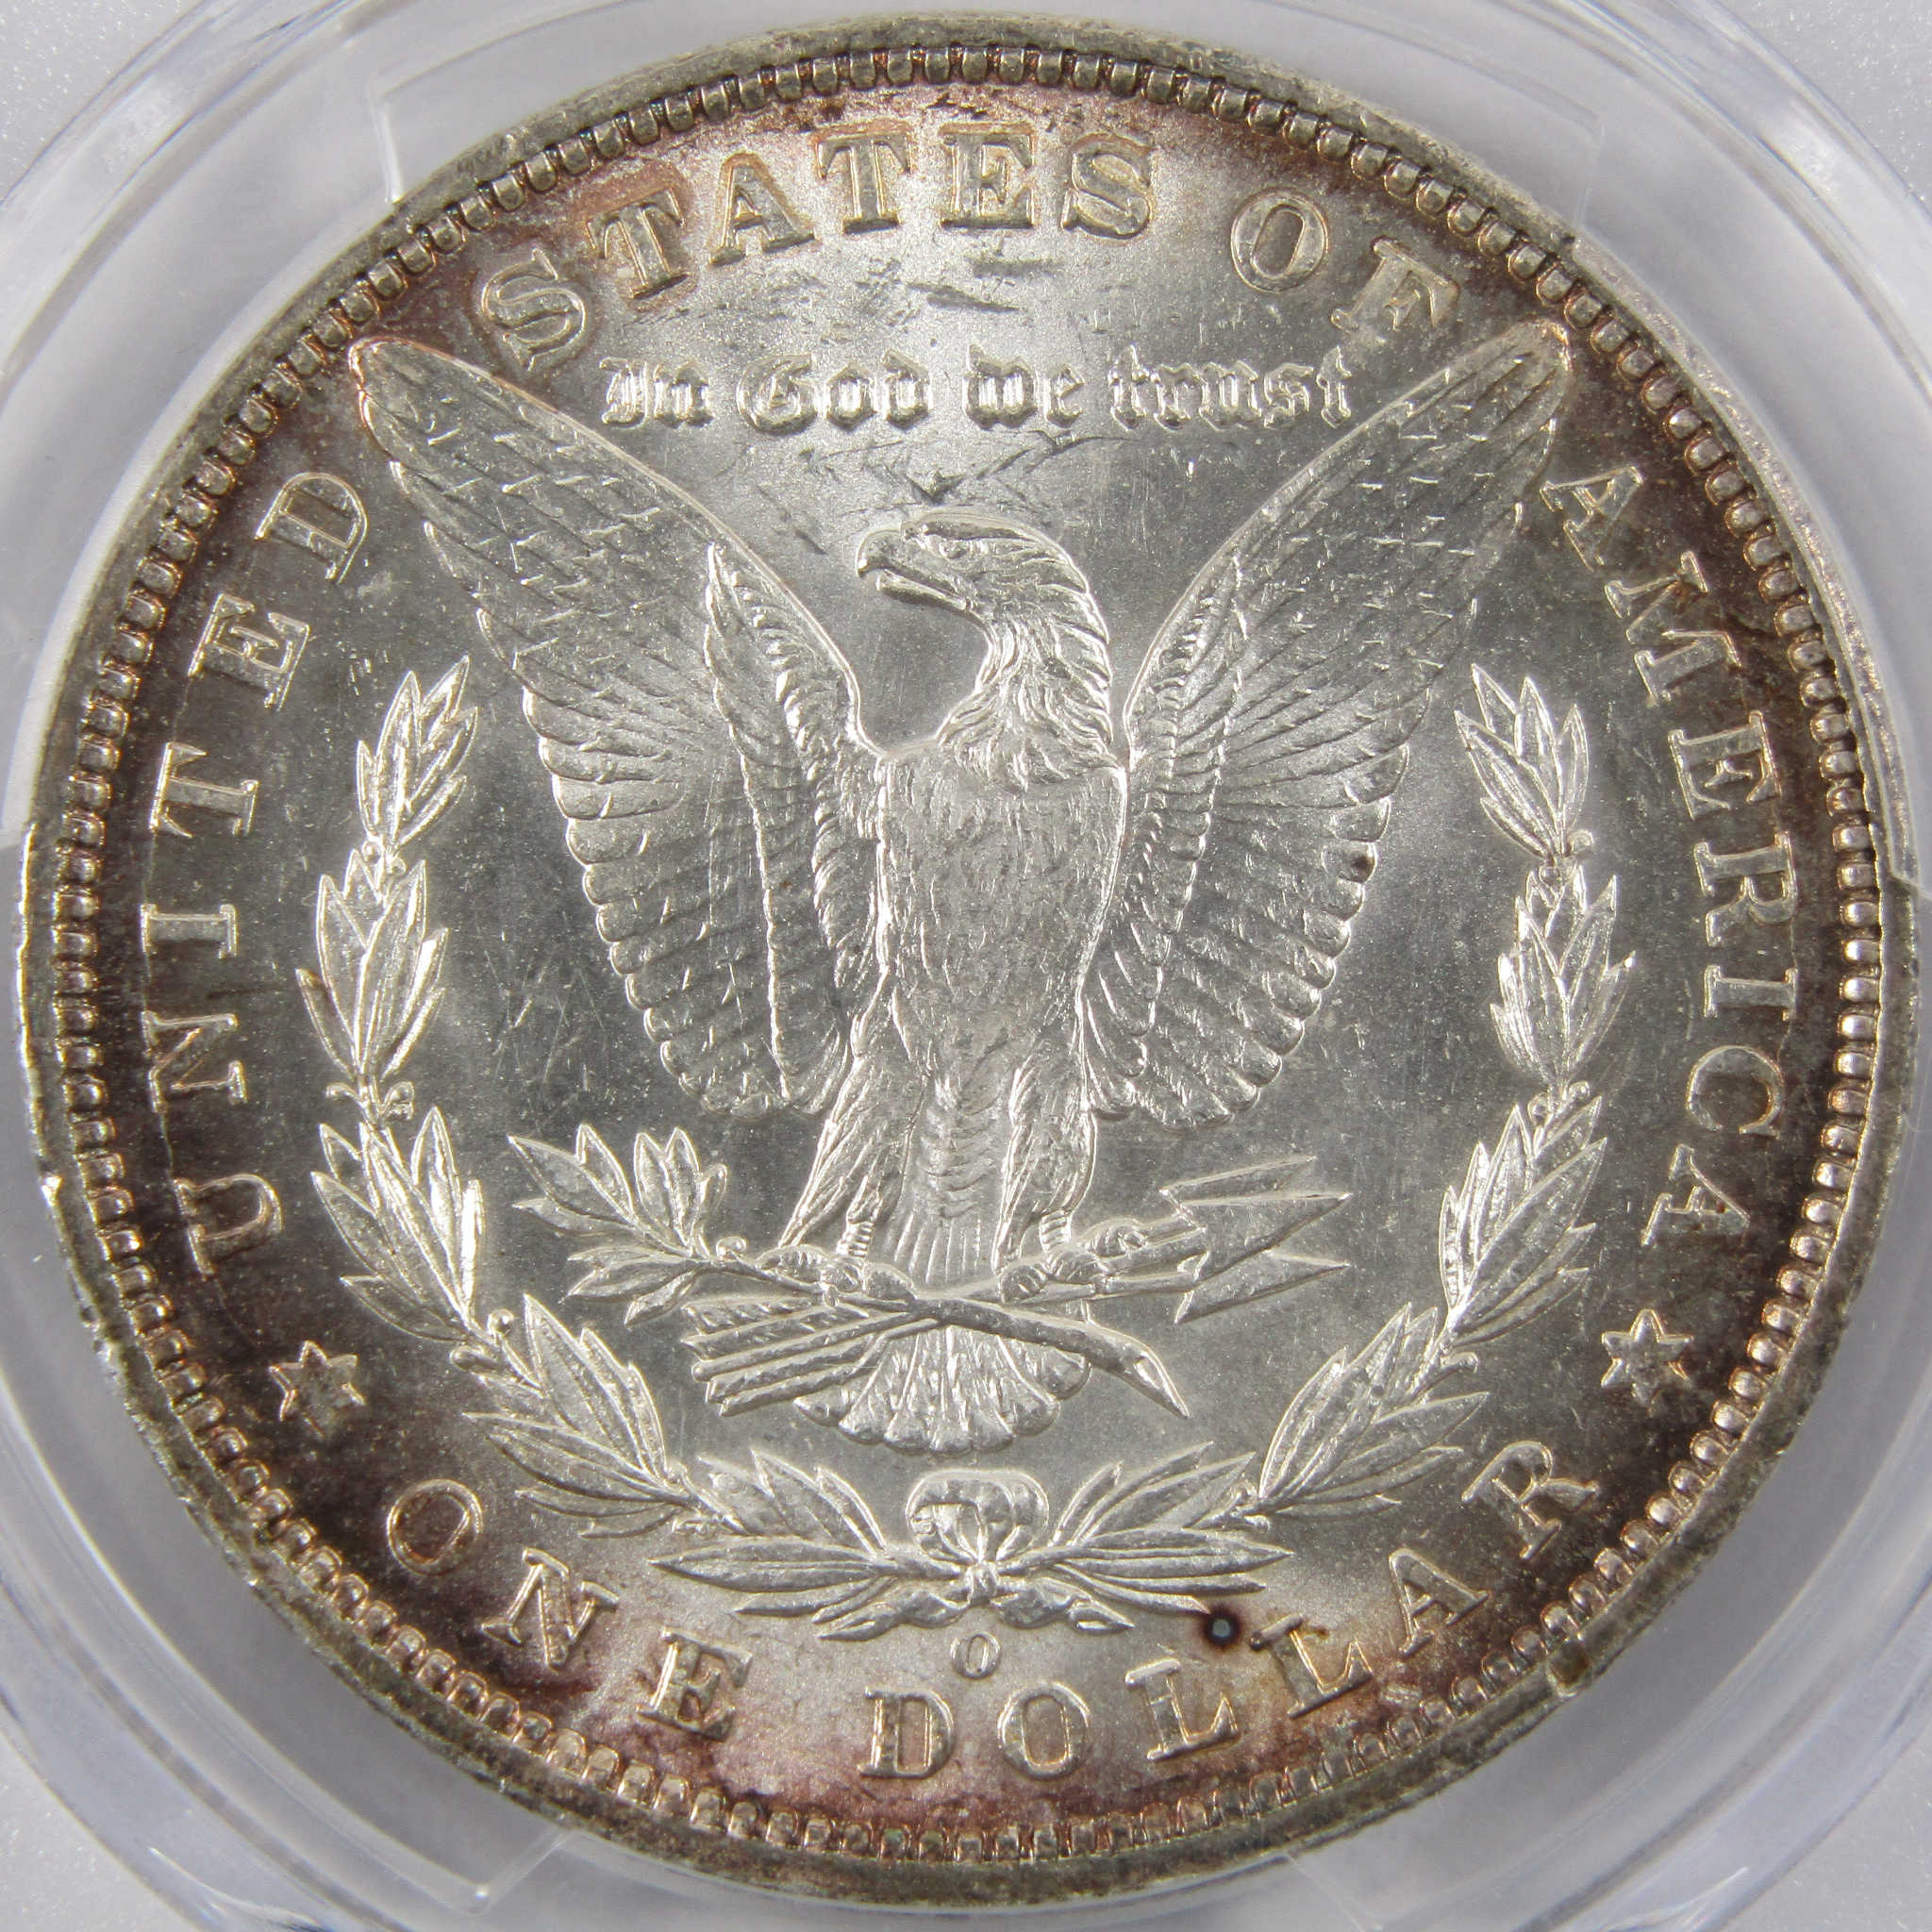 1896 O Morgan Dollar MS 61 PCGS Silver $1 Uncirculated Coin SKU:I9469 - Morgan coin - Morgan silver dollar - Morgan silver dollar for sale - Profile Coins &amp; Collectibles